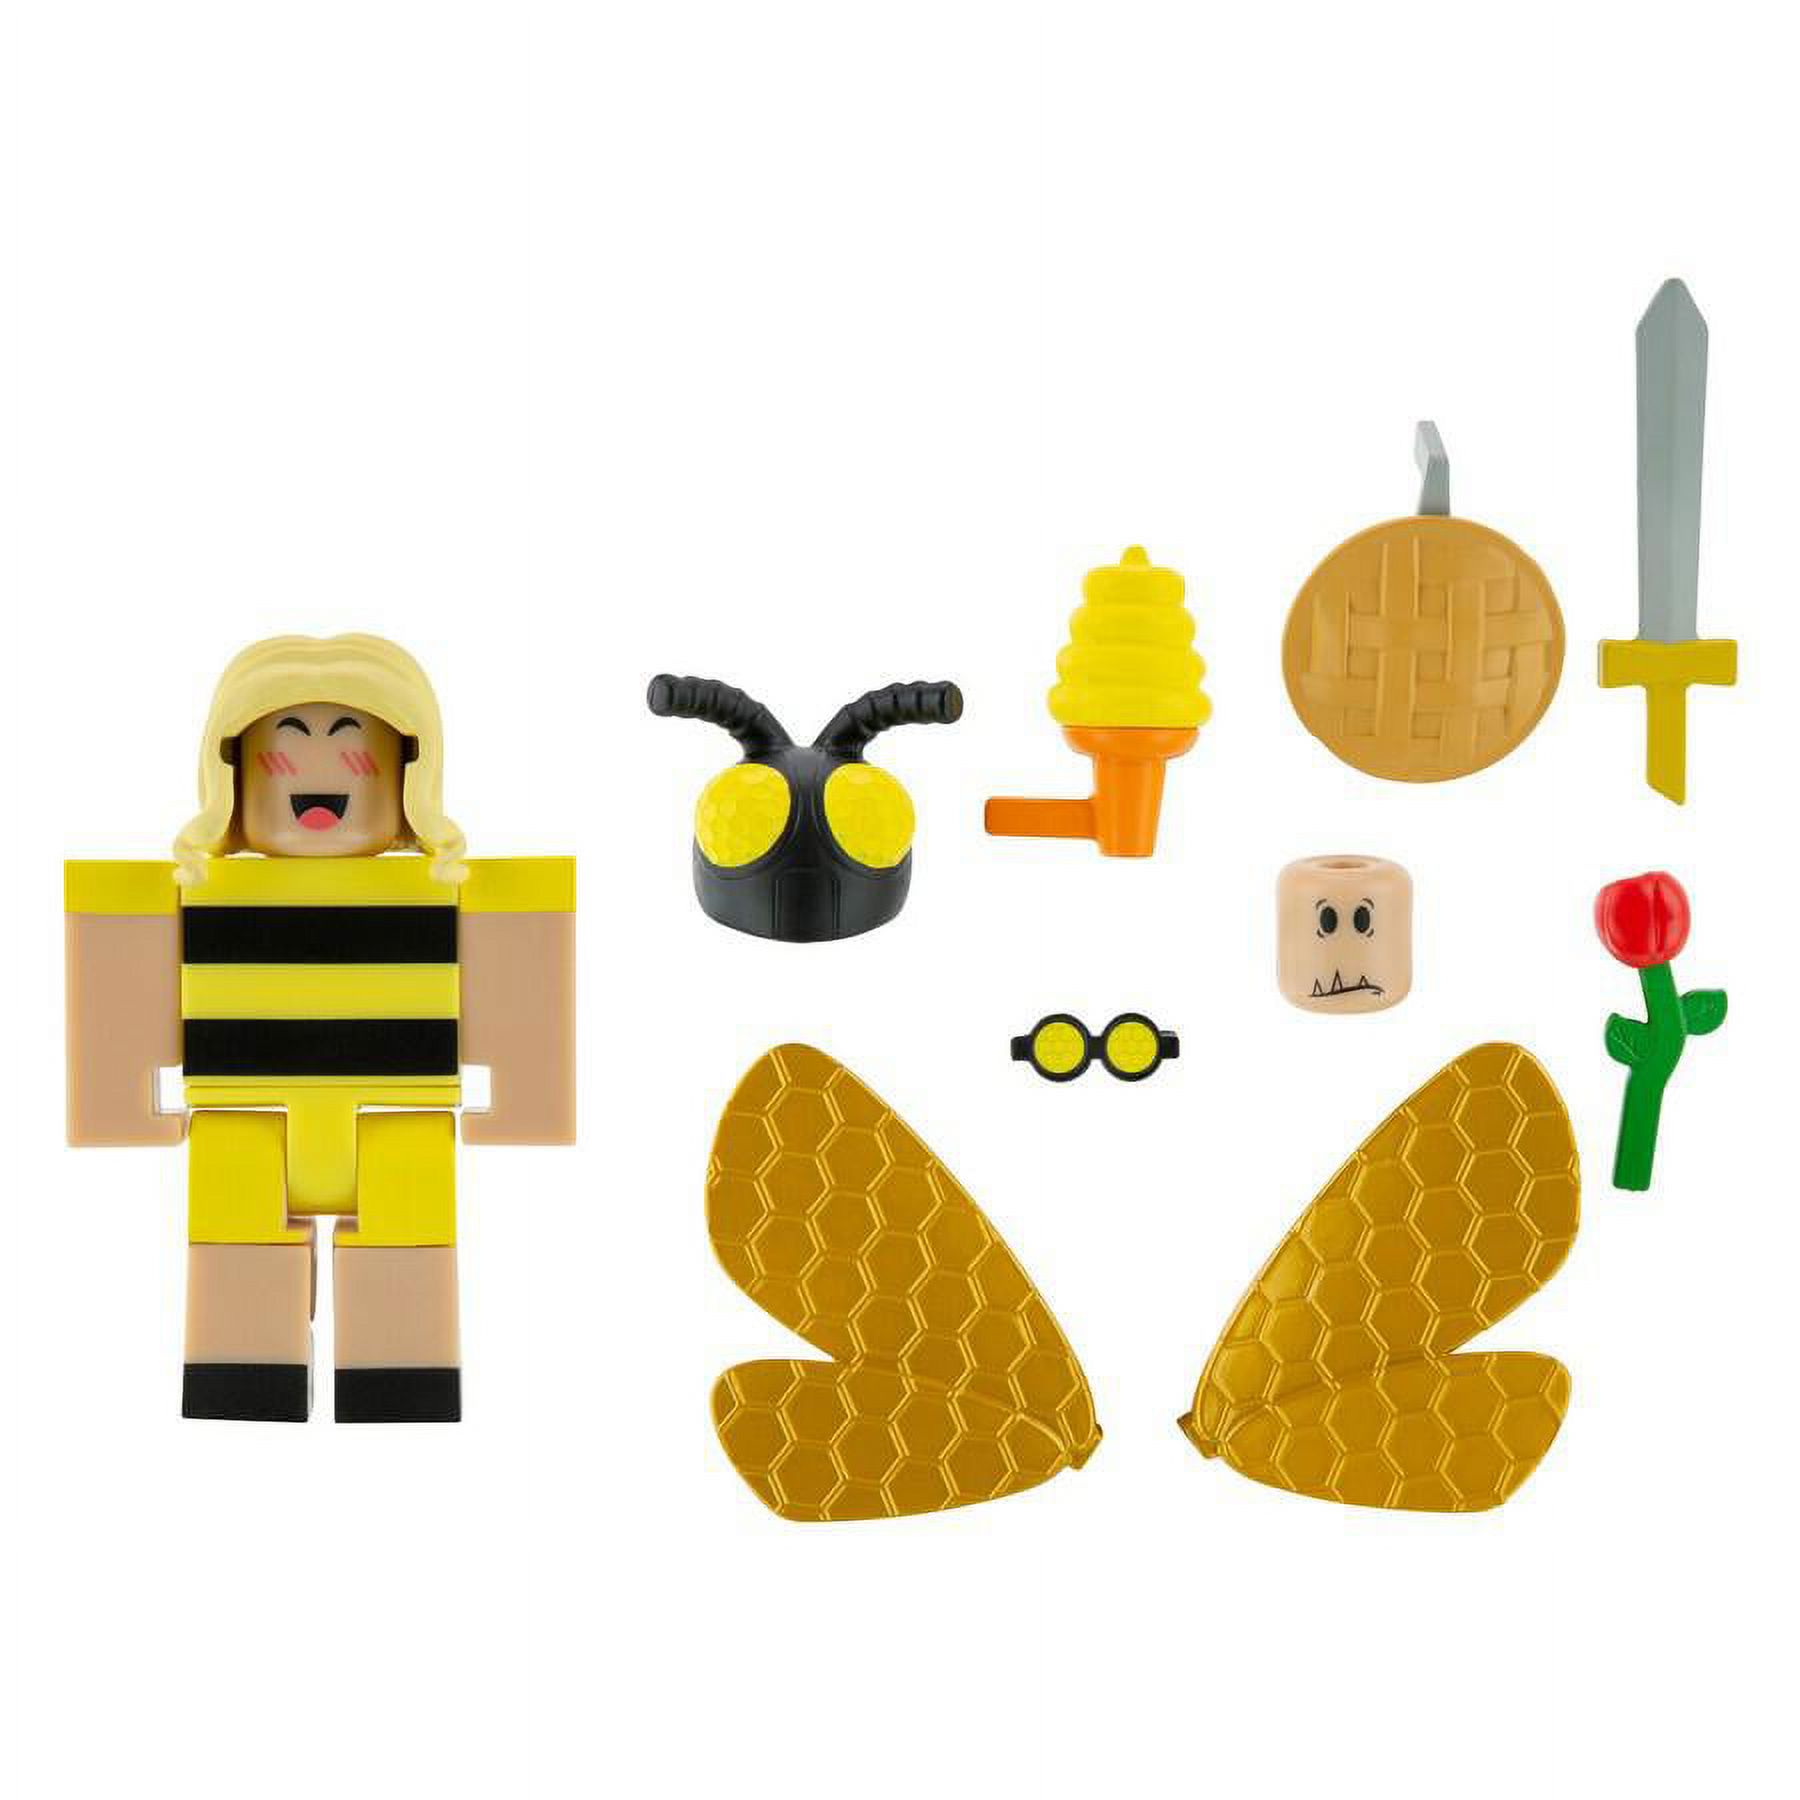 Roblox Avatar Shop Just Bee Yourself Action Figure